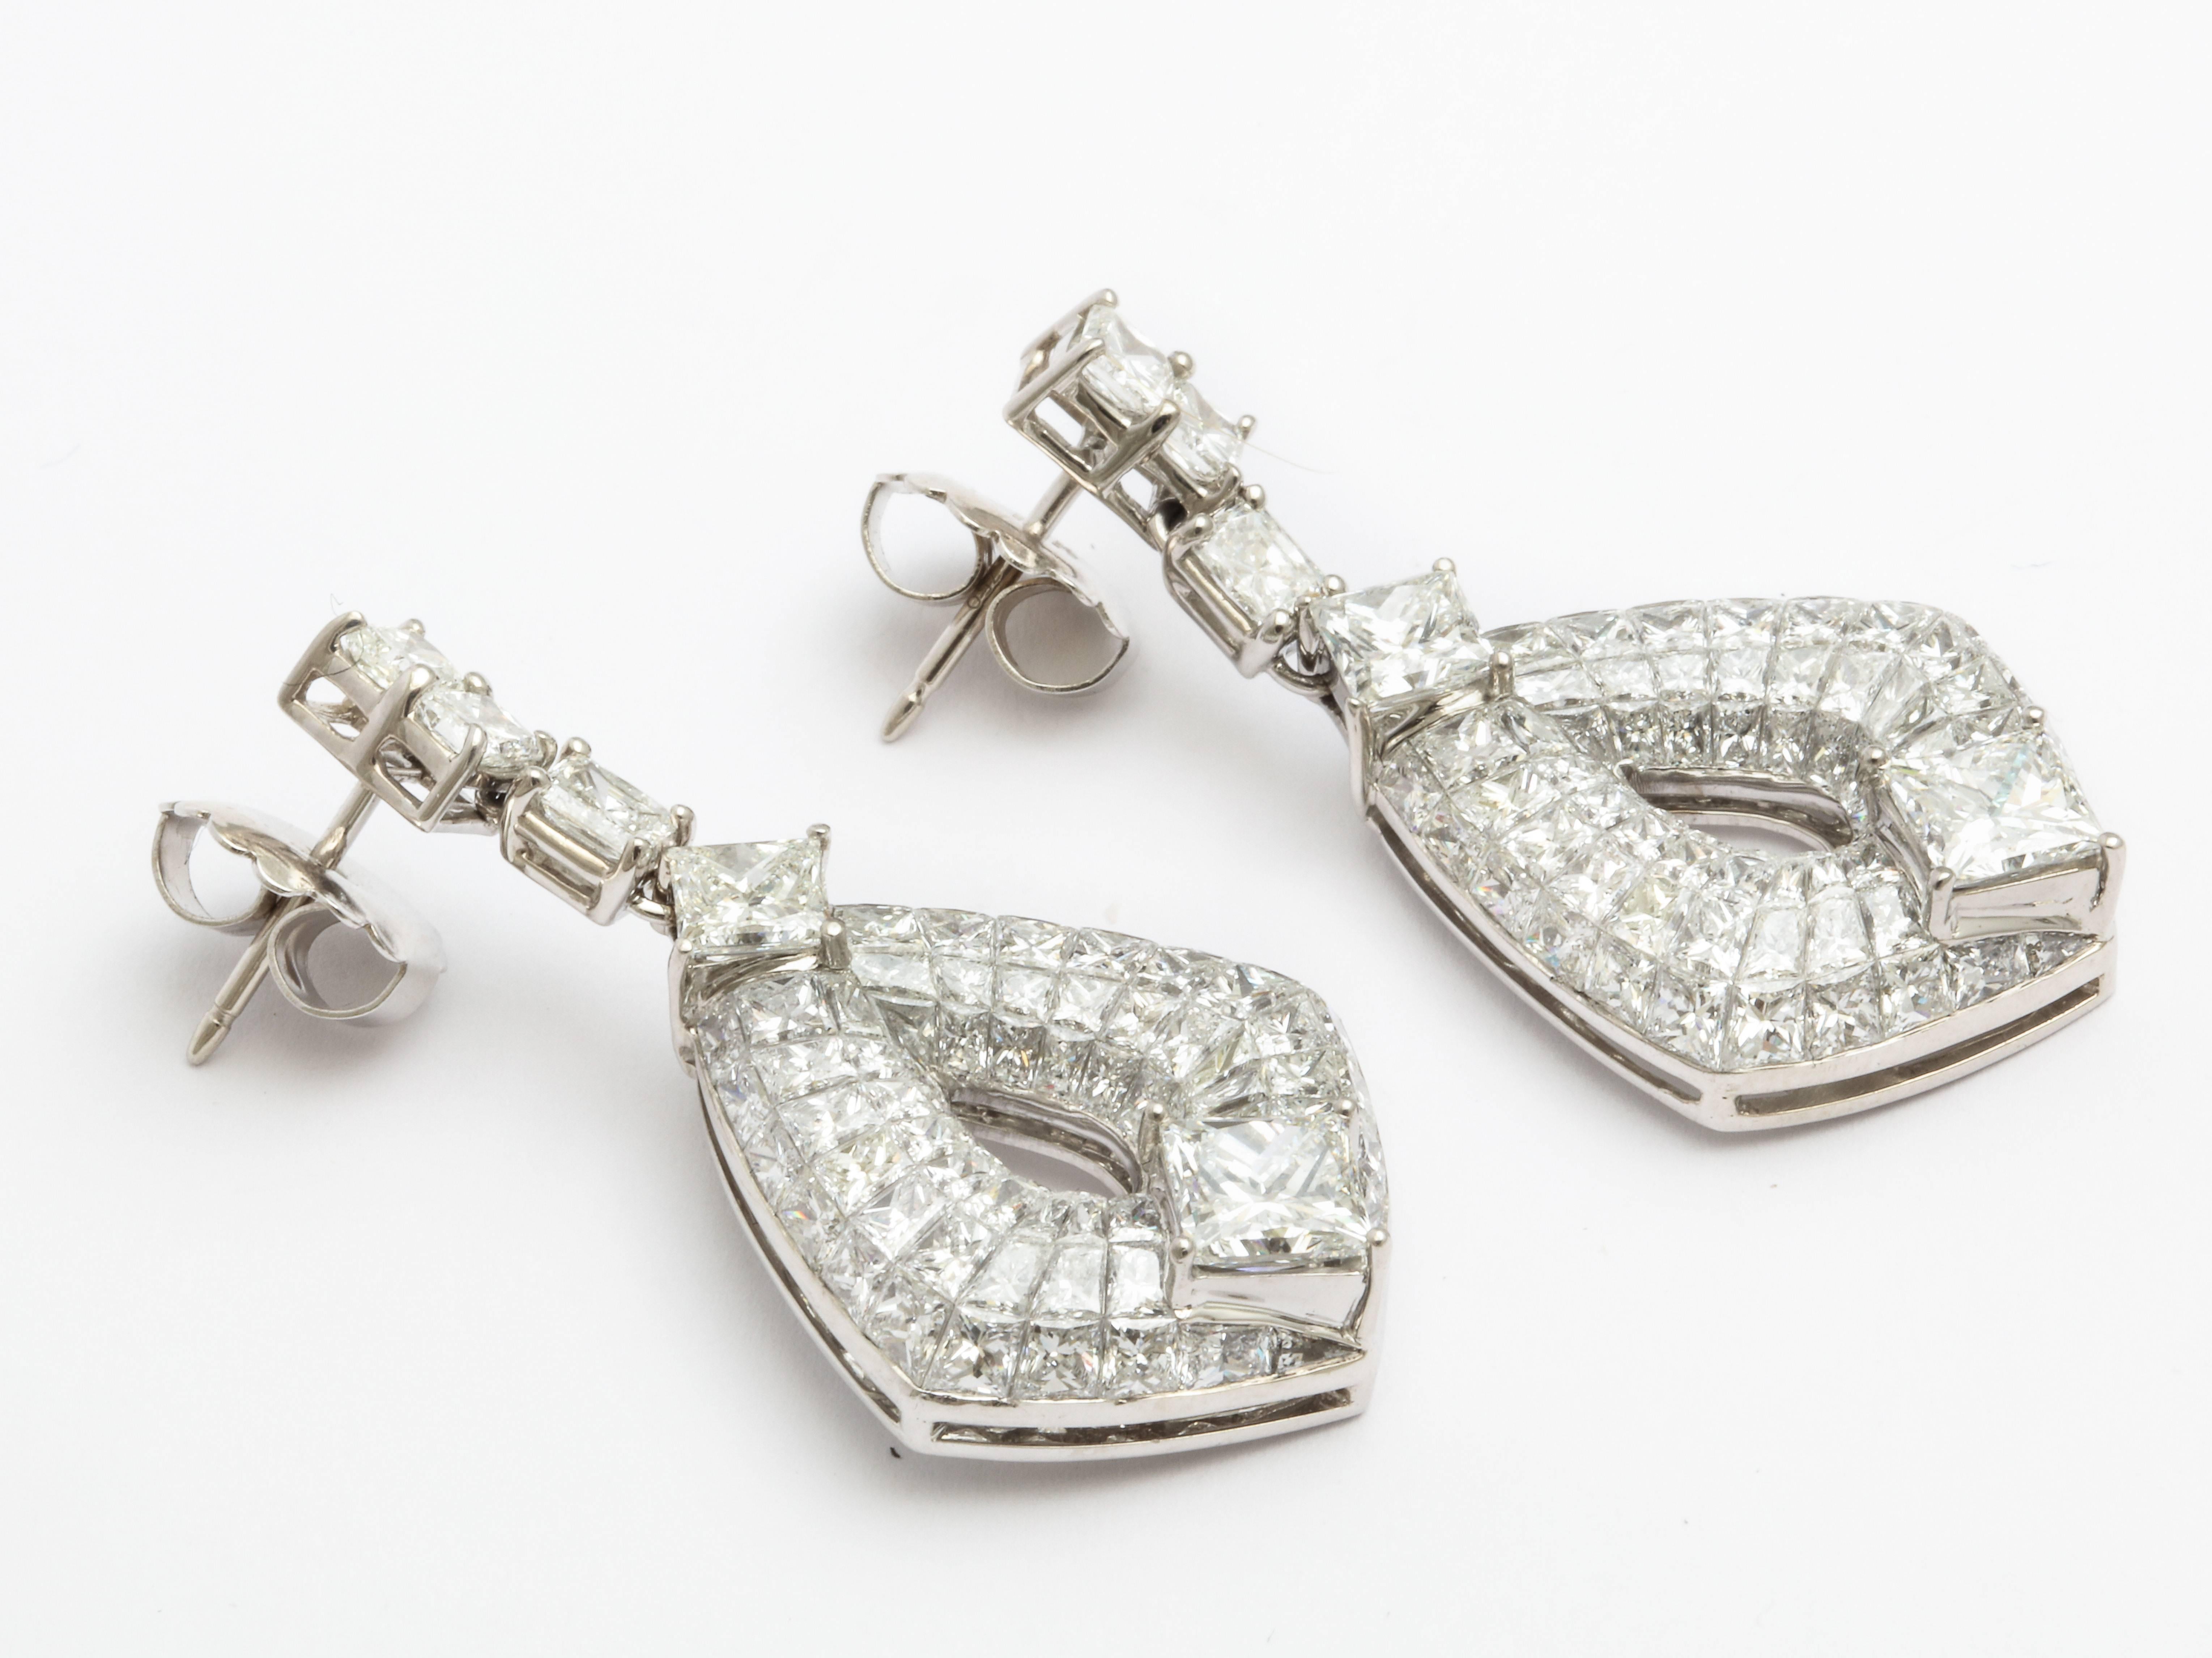 A pair of 18 karat white gold earrings featuring princess cut and quadrillion cut diamonds. Total estimated diamond weight of 12.66 carats. Diamonds range in clarity of VVS-VS and color of G-I.